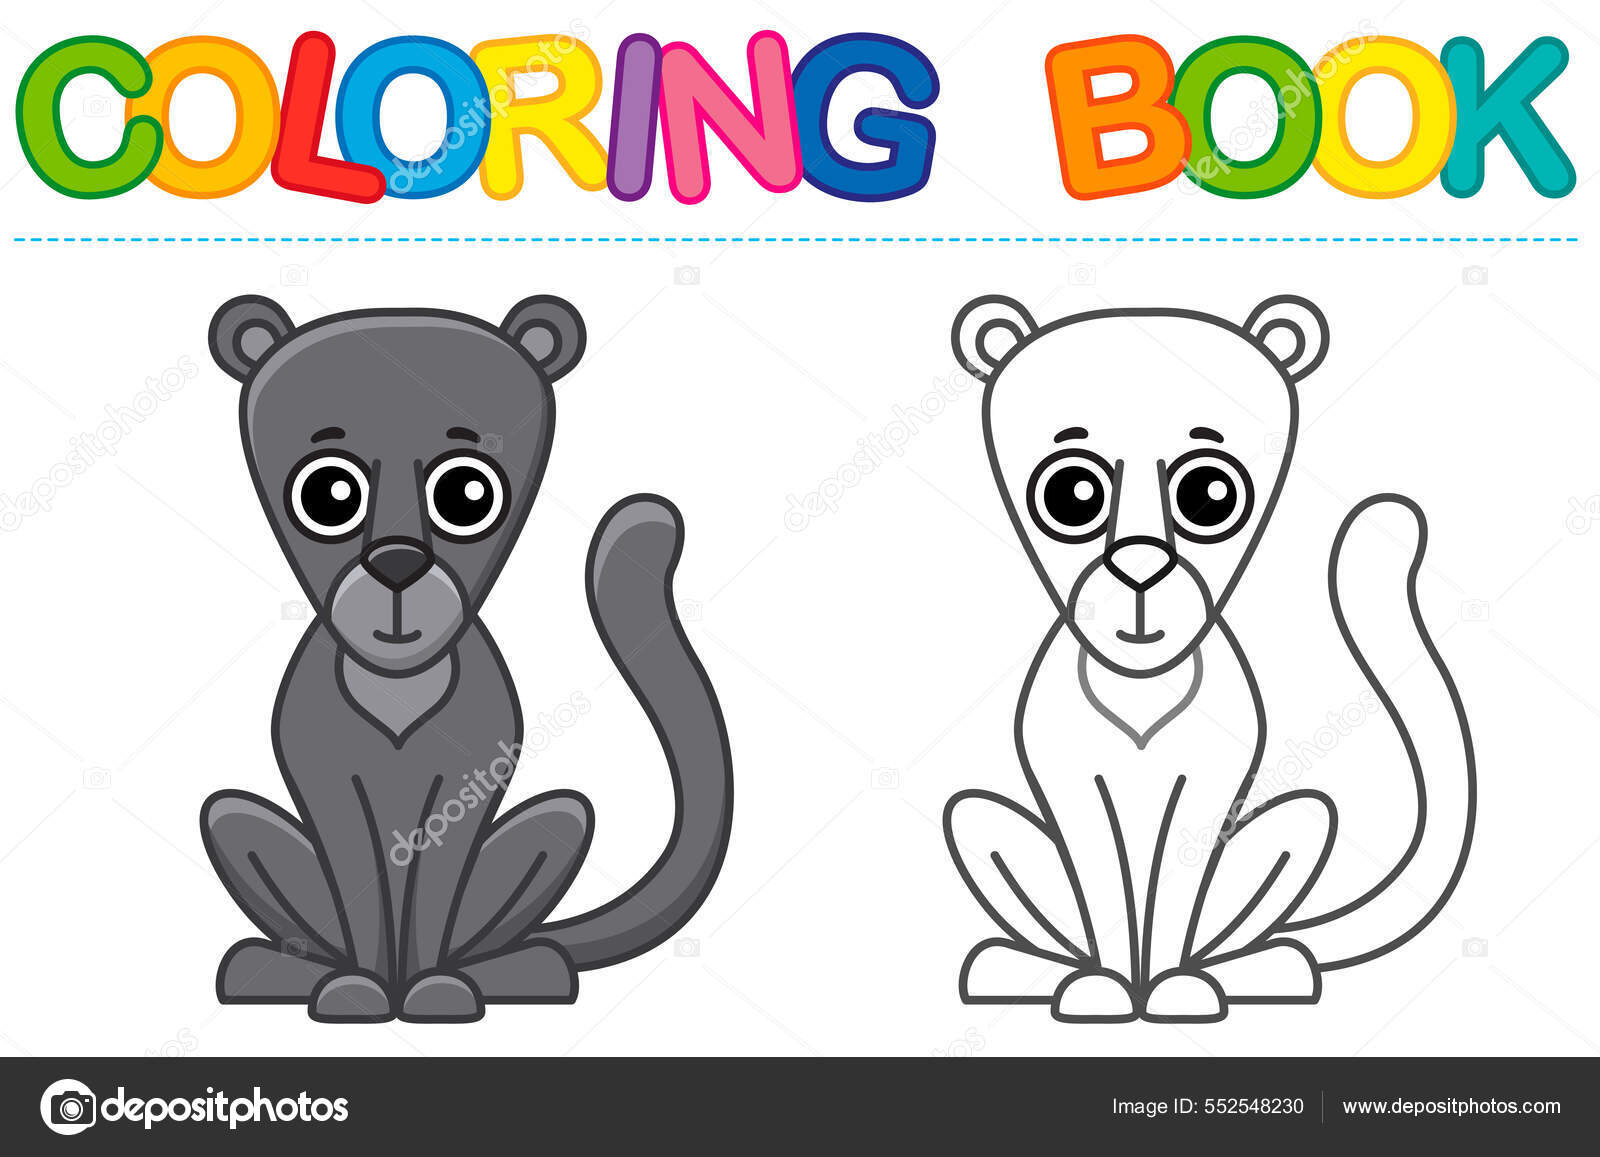 Coloring animal children coloring book funny puma cartoon style trace stock vector by natasha